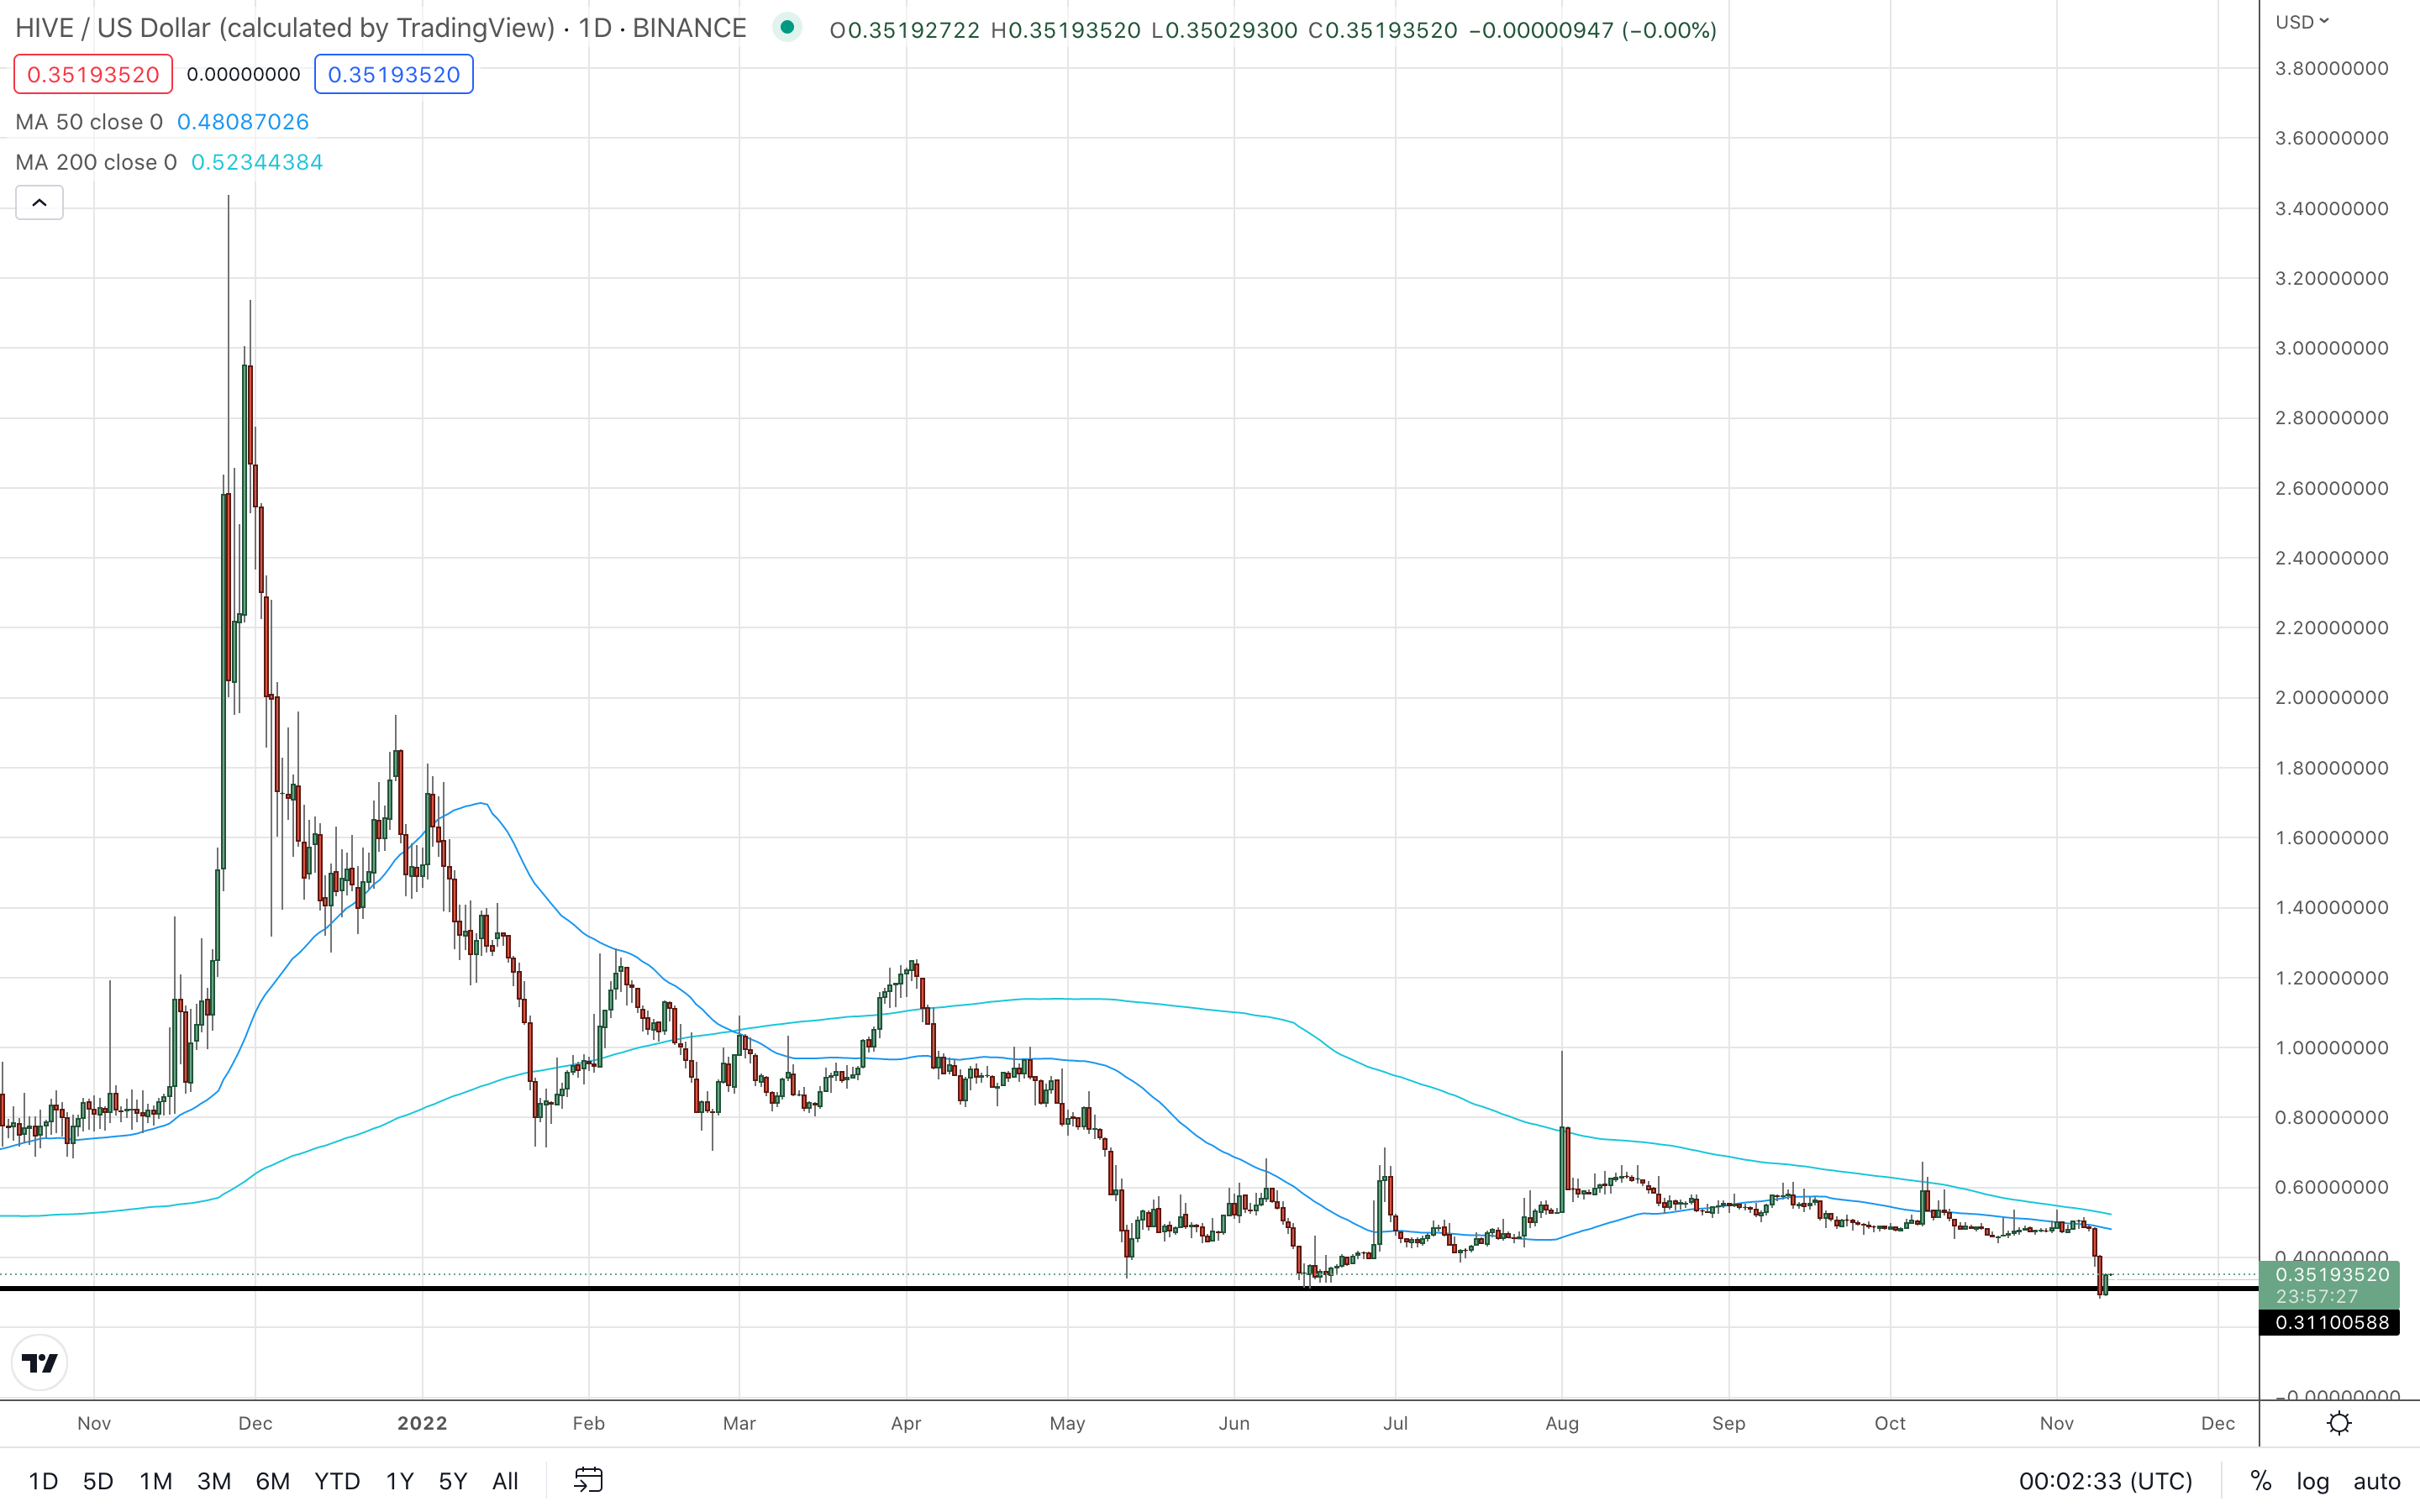 The HIVE crypto price chart showing its potential following a drop back to support.